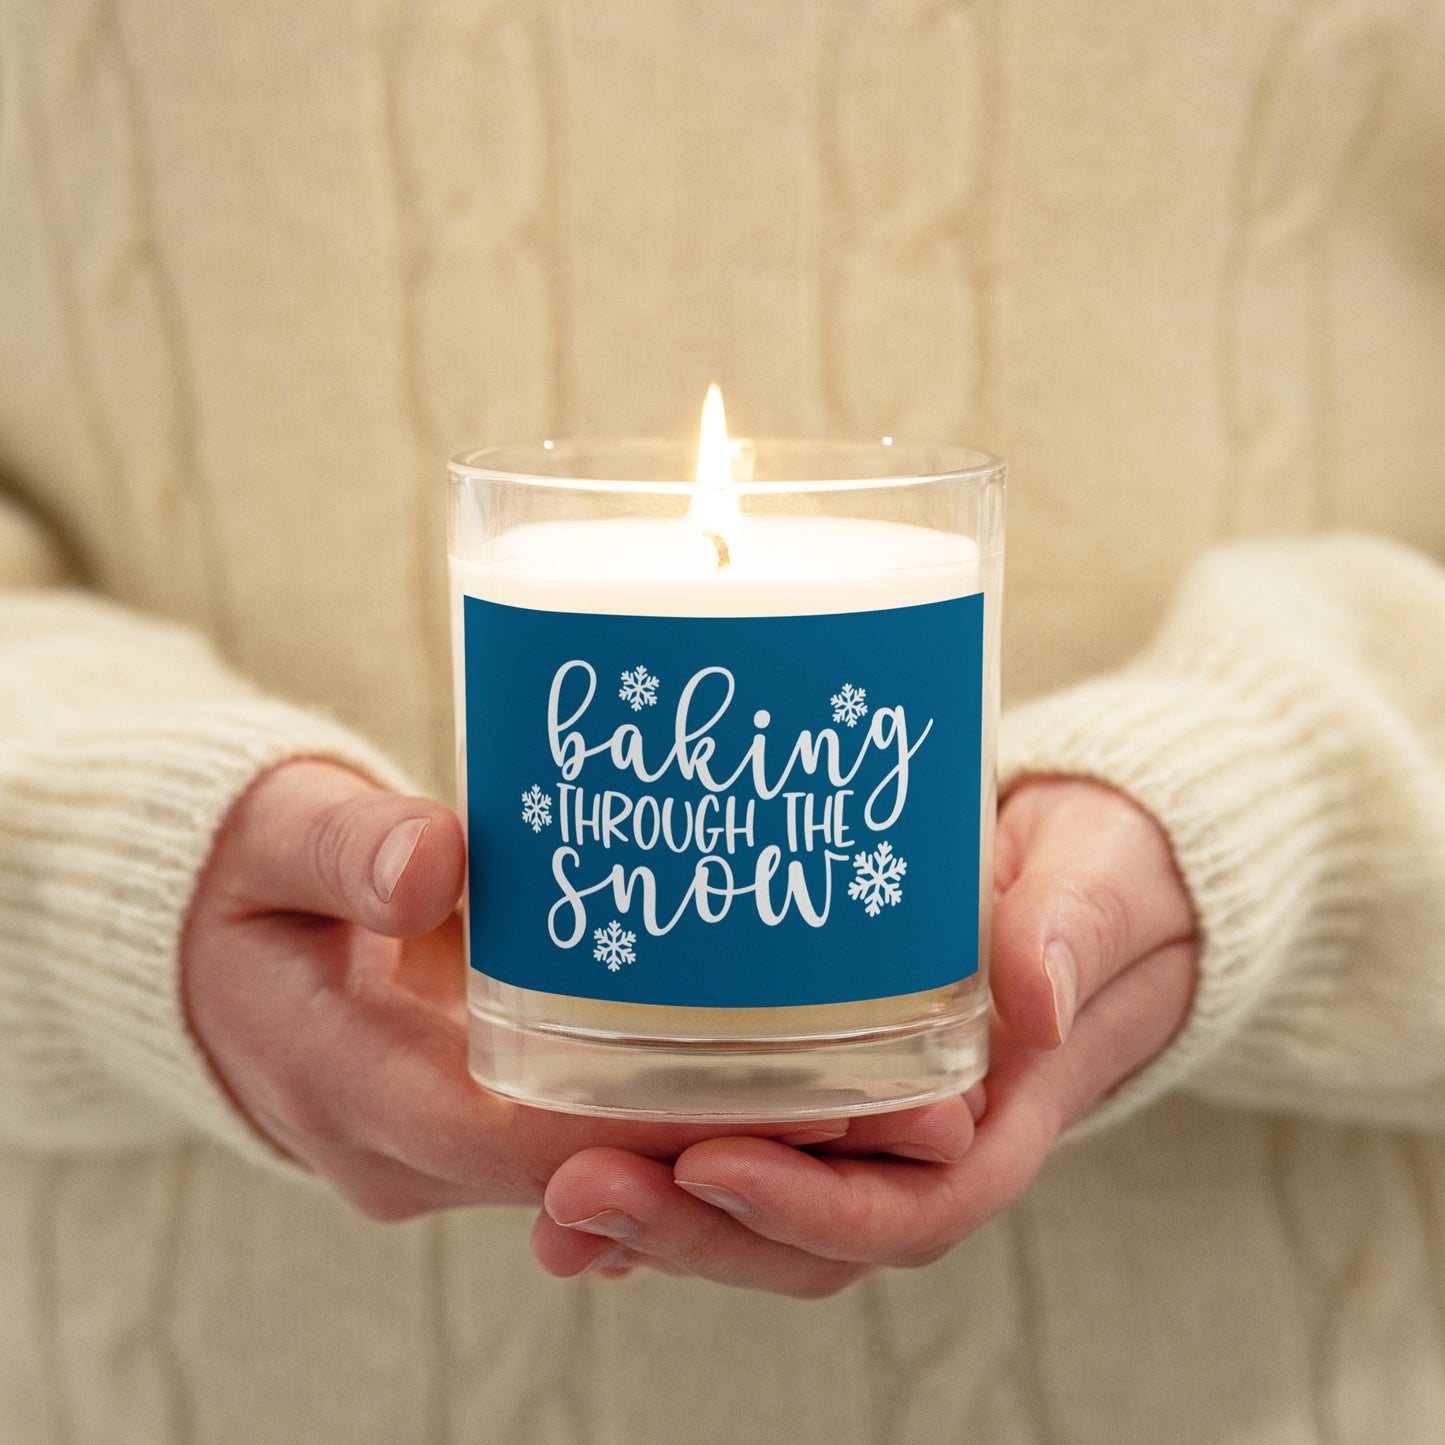 Baking Through the Snow Glass Jar Soy Wax Candle